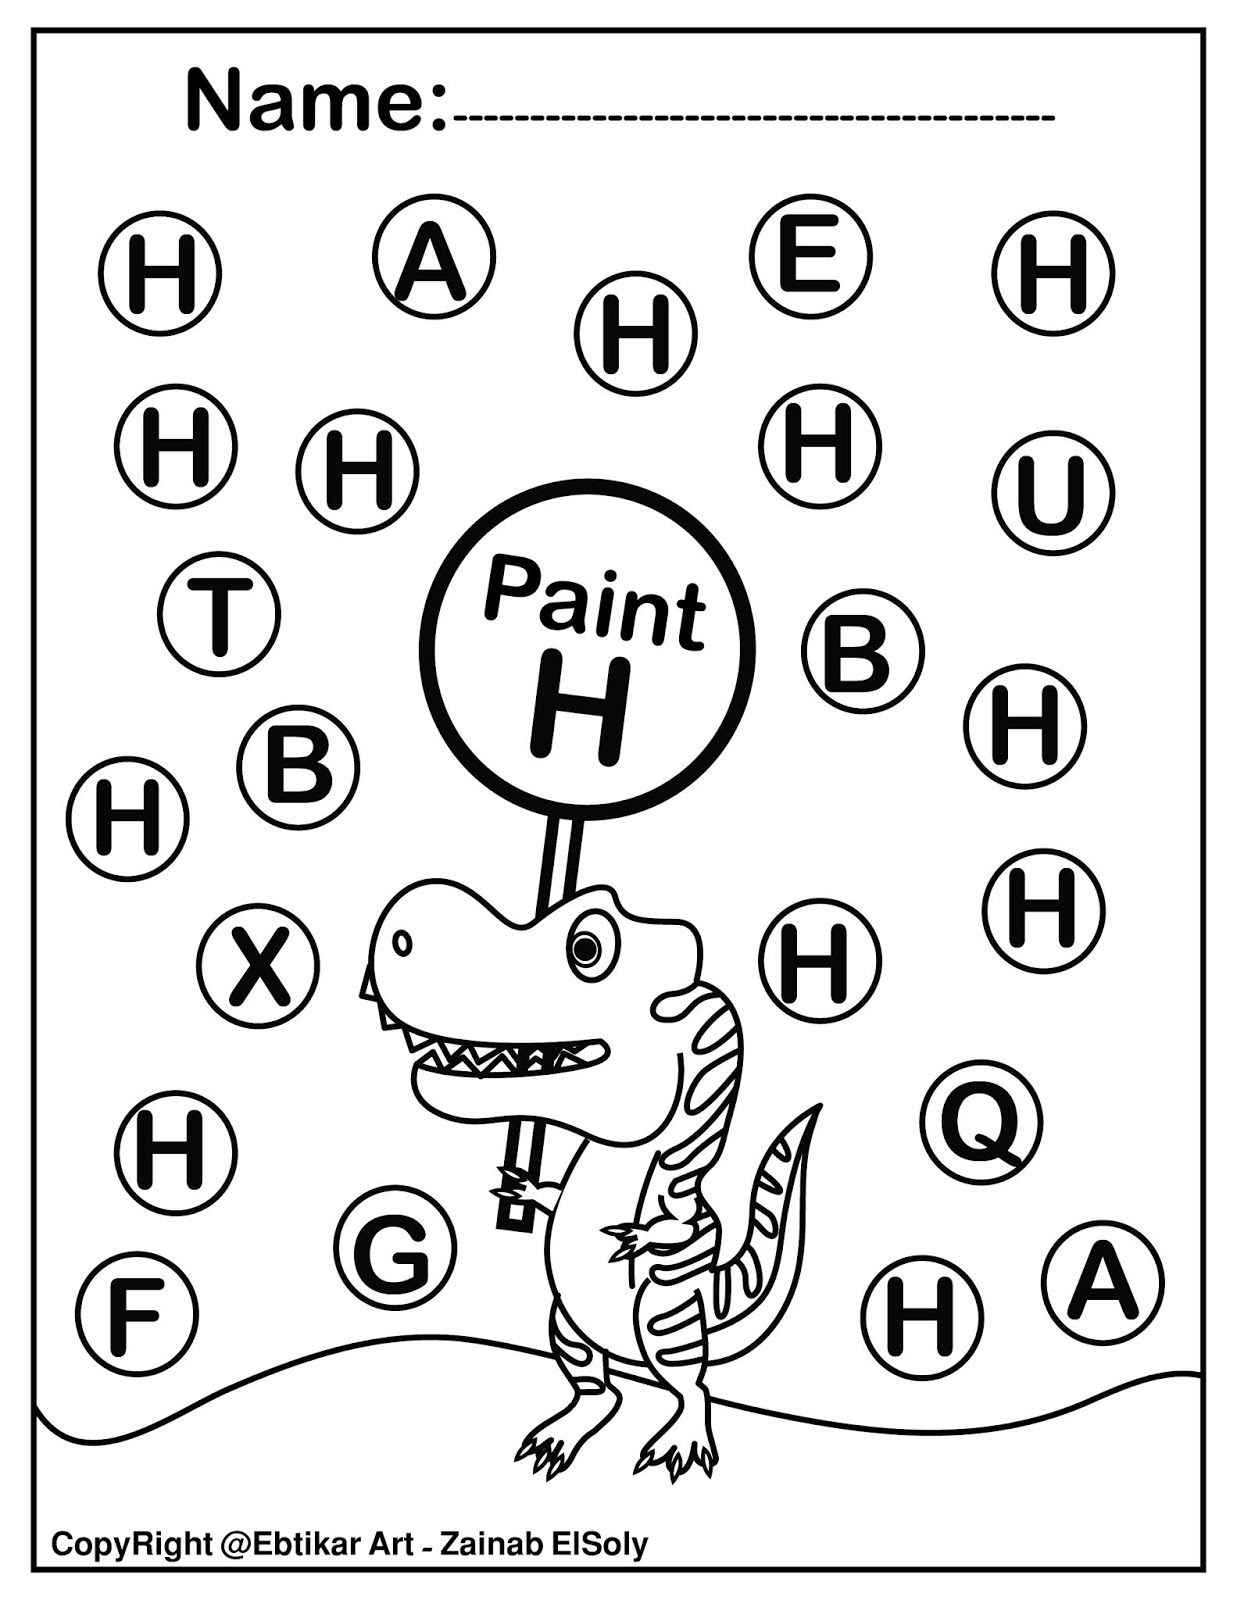 Dot Markers Activity Book ABC Dinosaurs: Dot Marker Coloring Worksheets  With Alphabet Letters And Dinosaurs For Kids Ages 4-8 - Dinosaur Coloring  Book (Paperback)